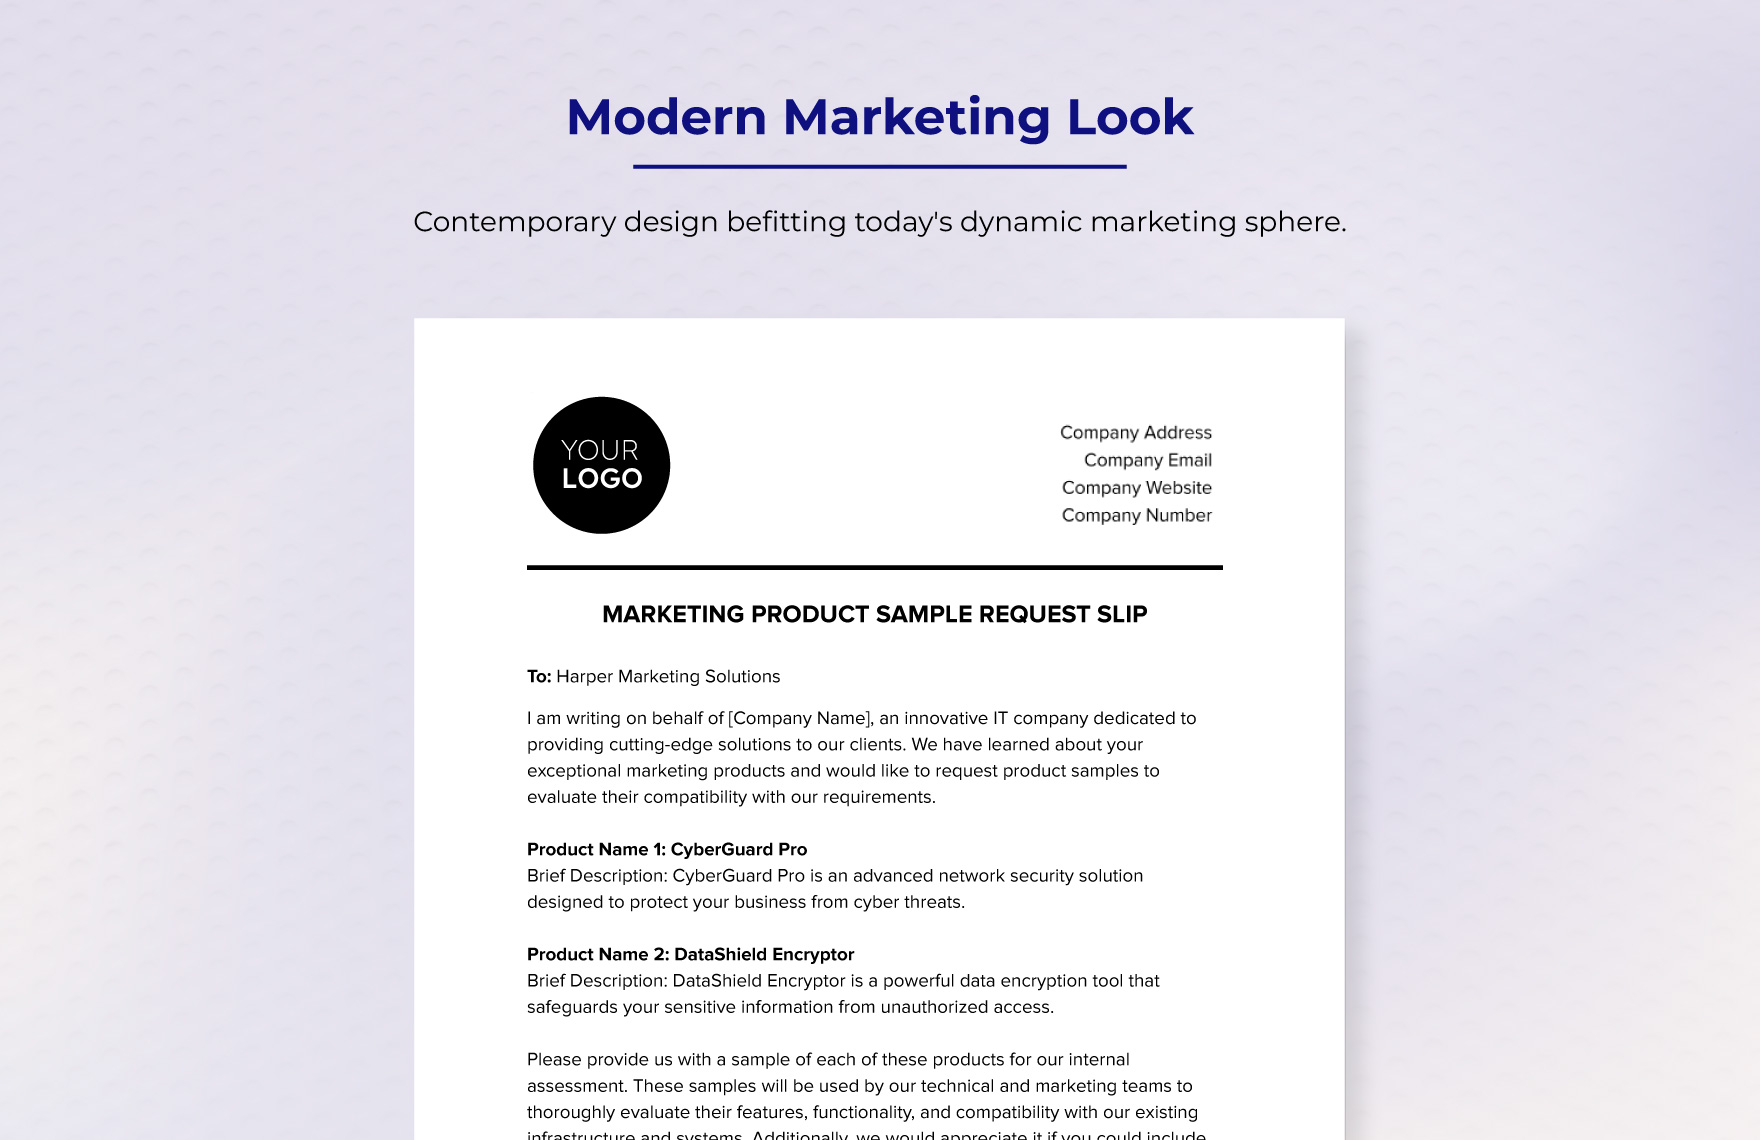 Marketing Product Sample Request Slip Template